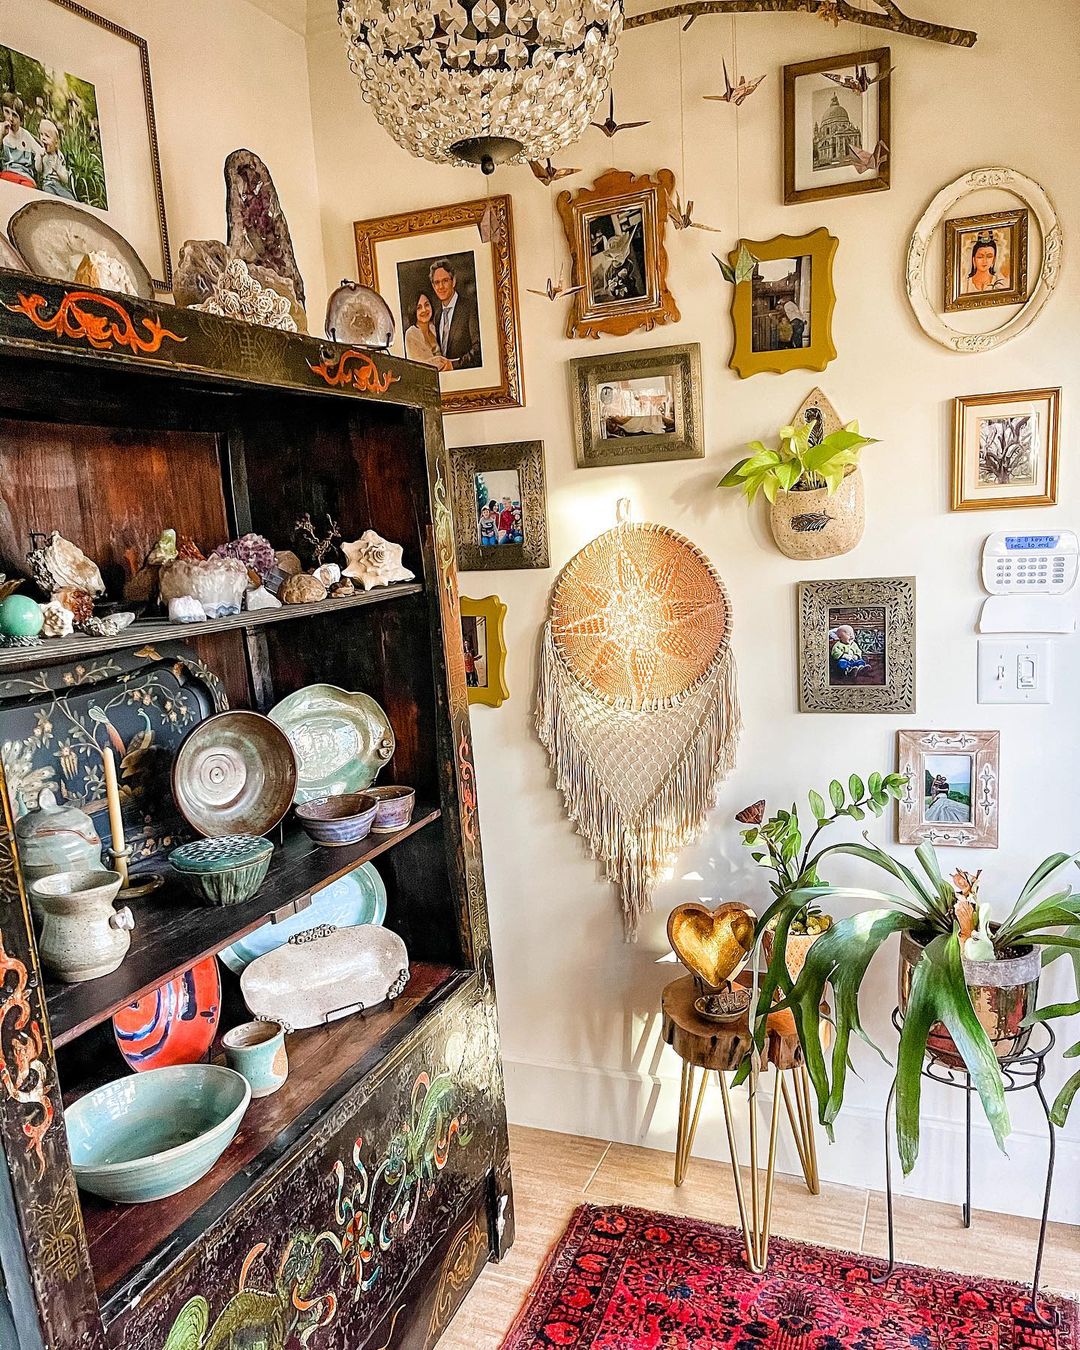 Decorated, antique bookshelf presenting vintage platters, pots, shells, and geods, beside plants and a wall with photos framed in old, unique frames. Photo by Instagram user @the.rustic.bohemian.